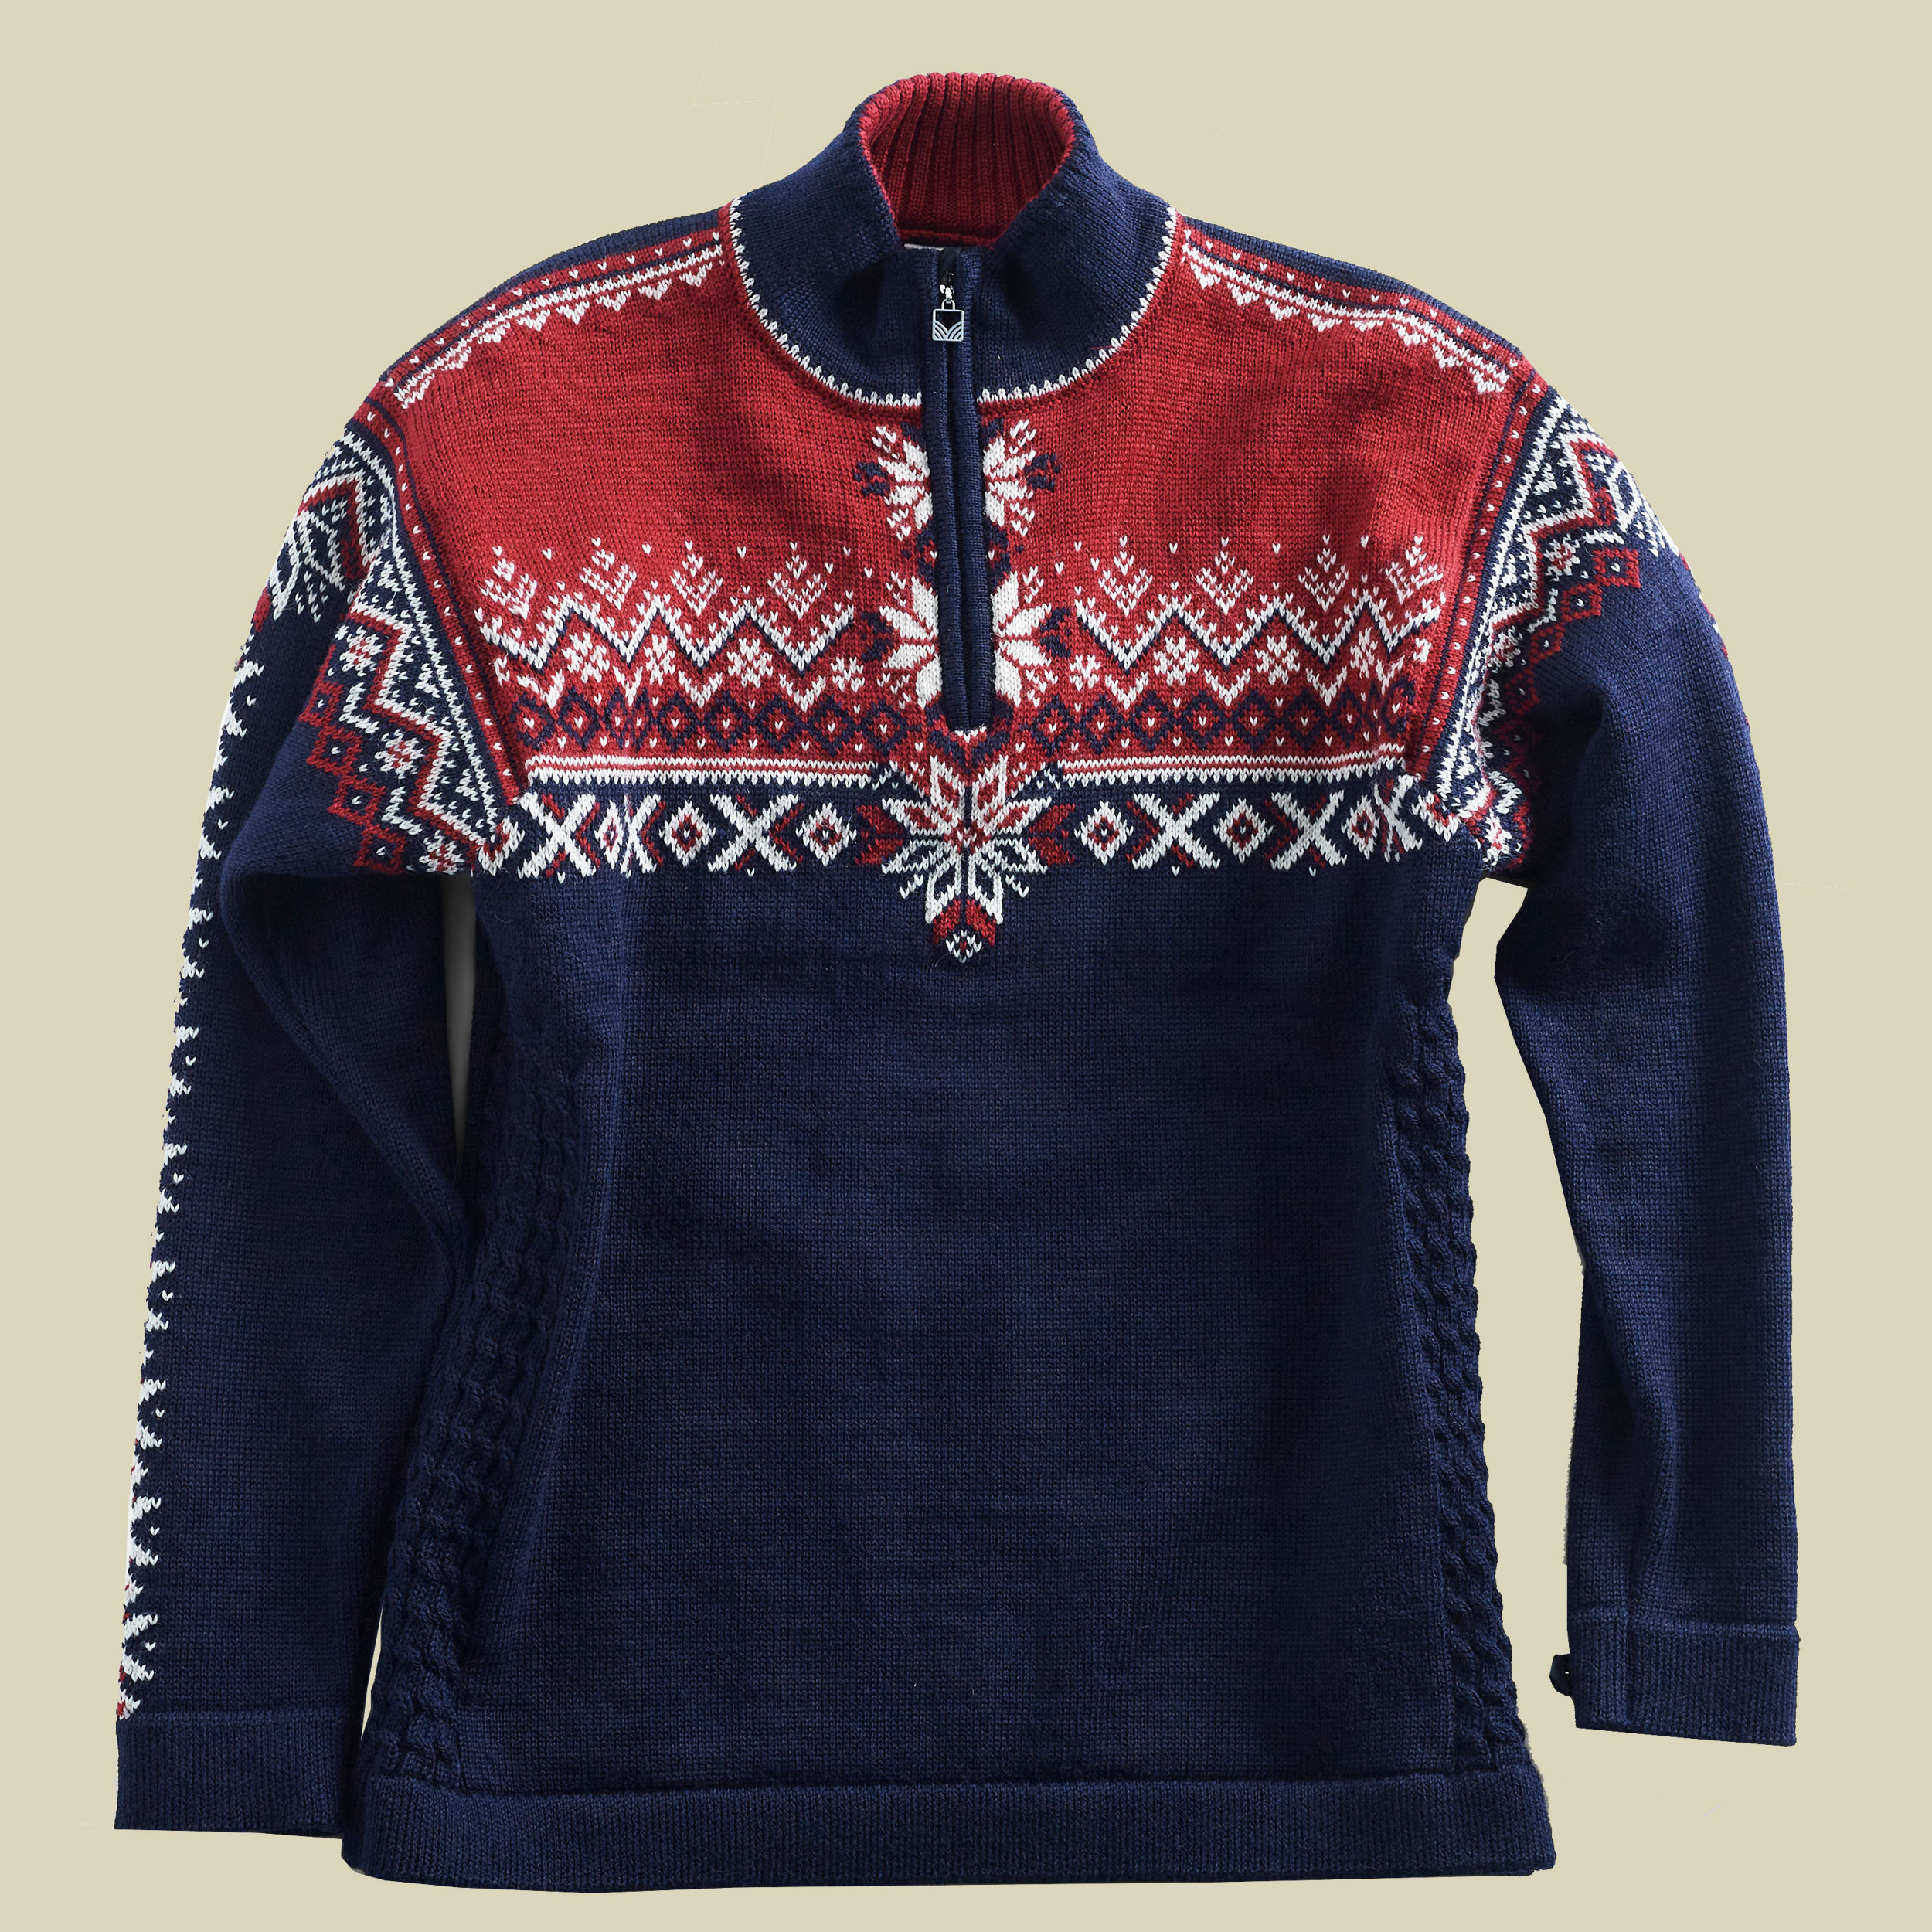 140th Anniversary Sweater Men Größe L  Farbe navy/red rose/off white